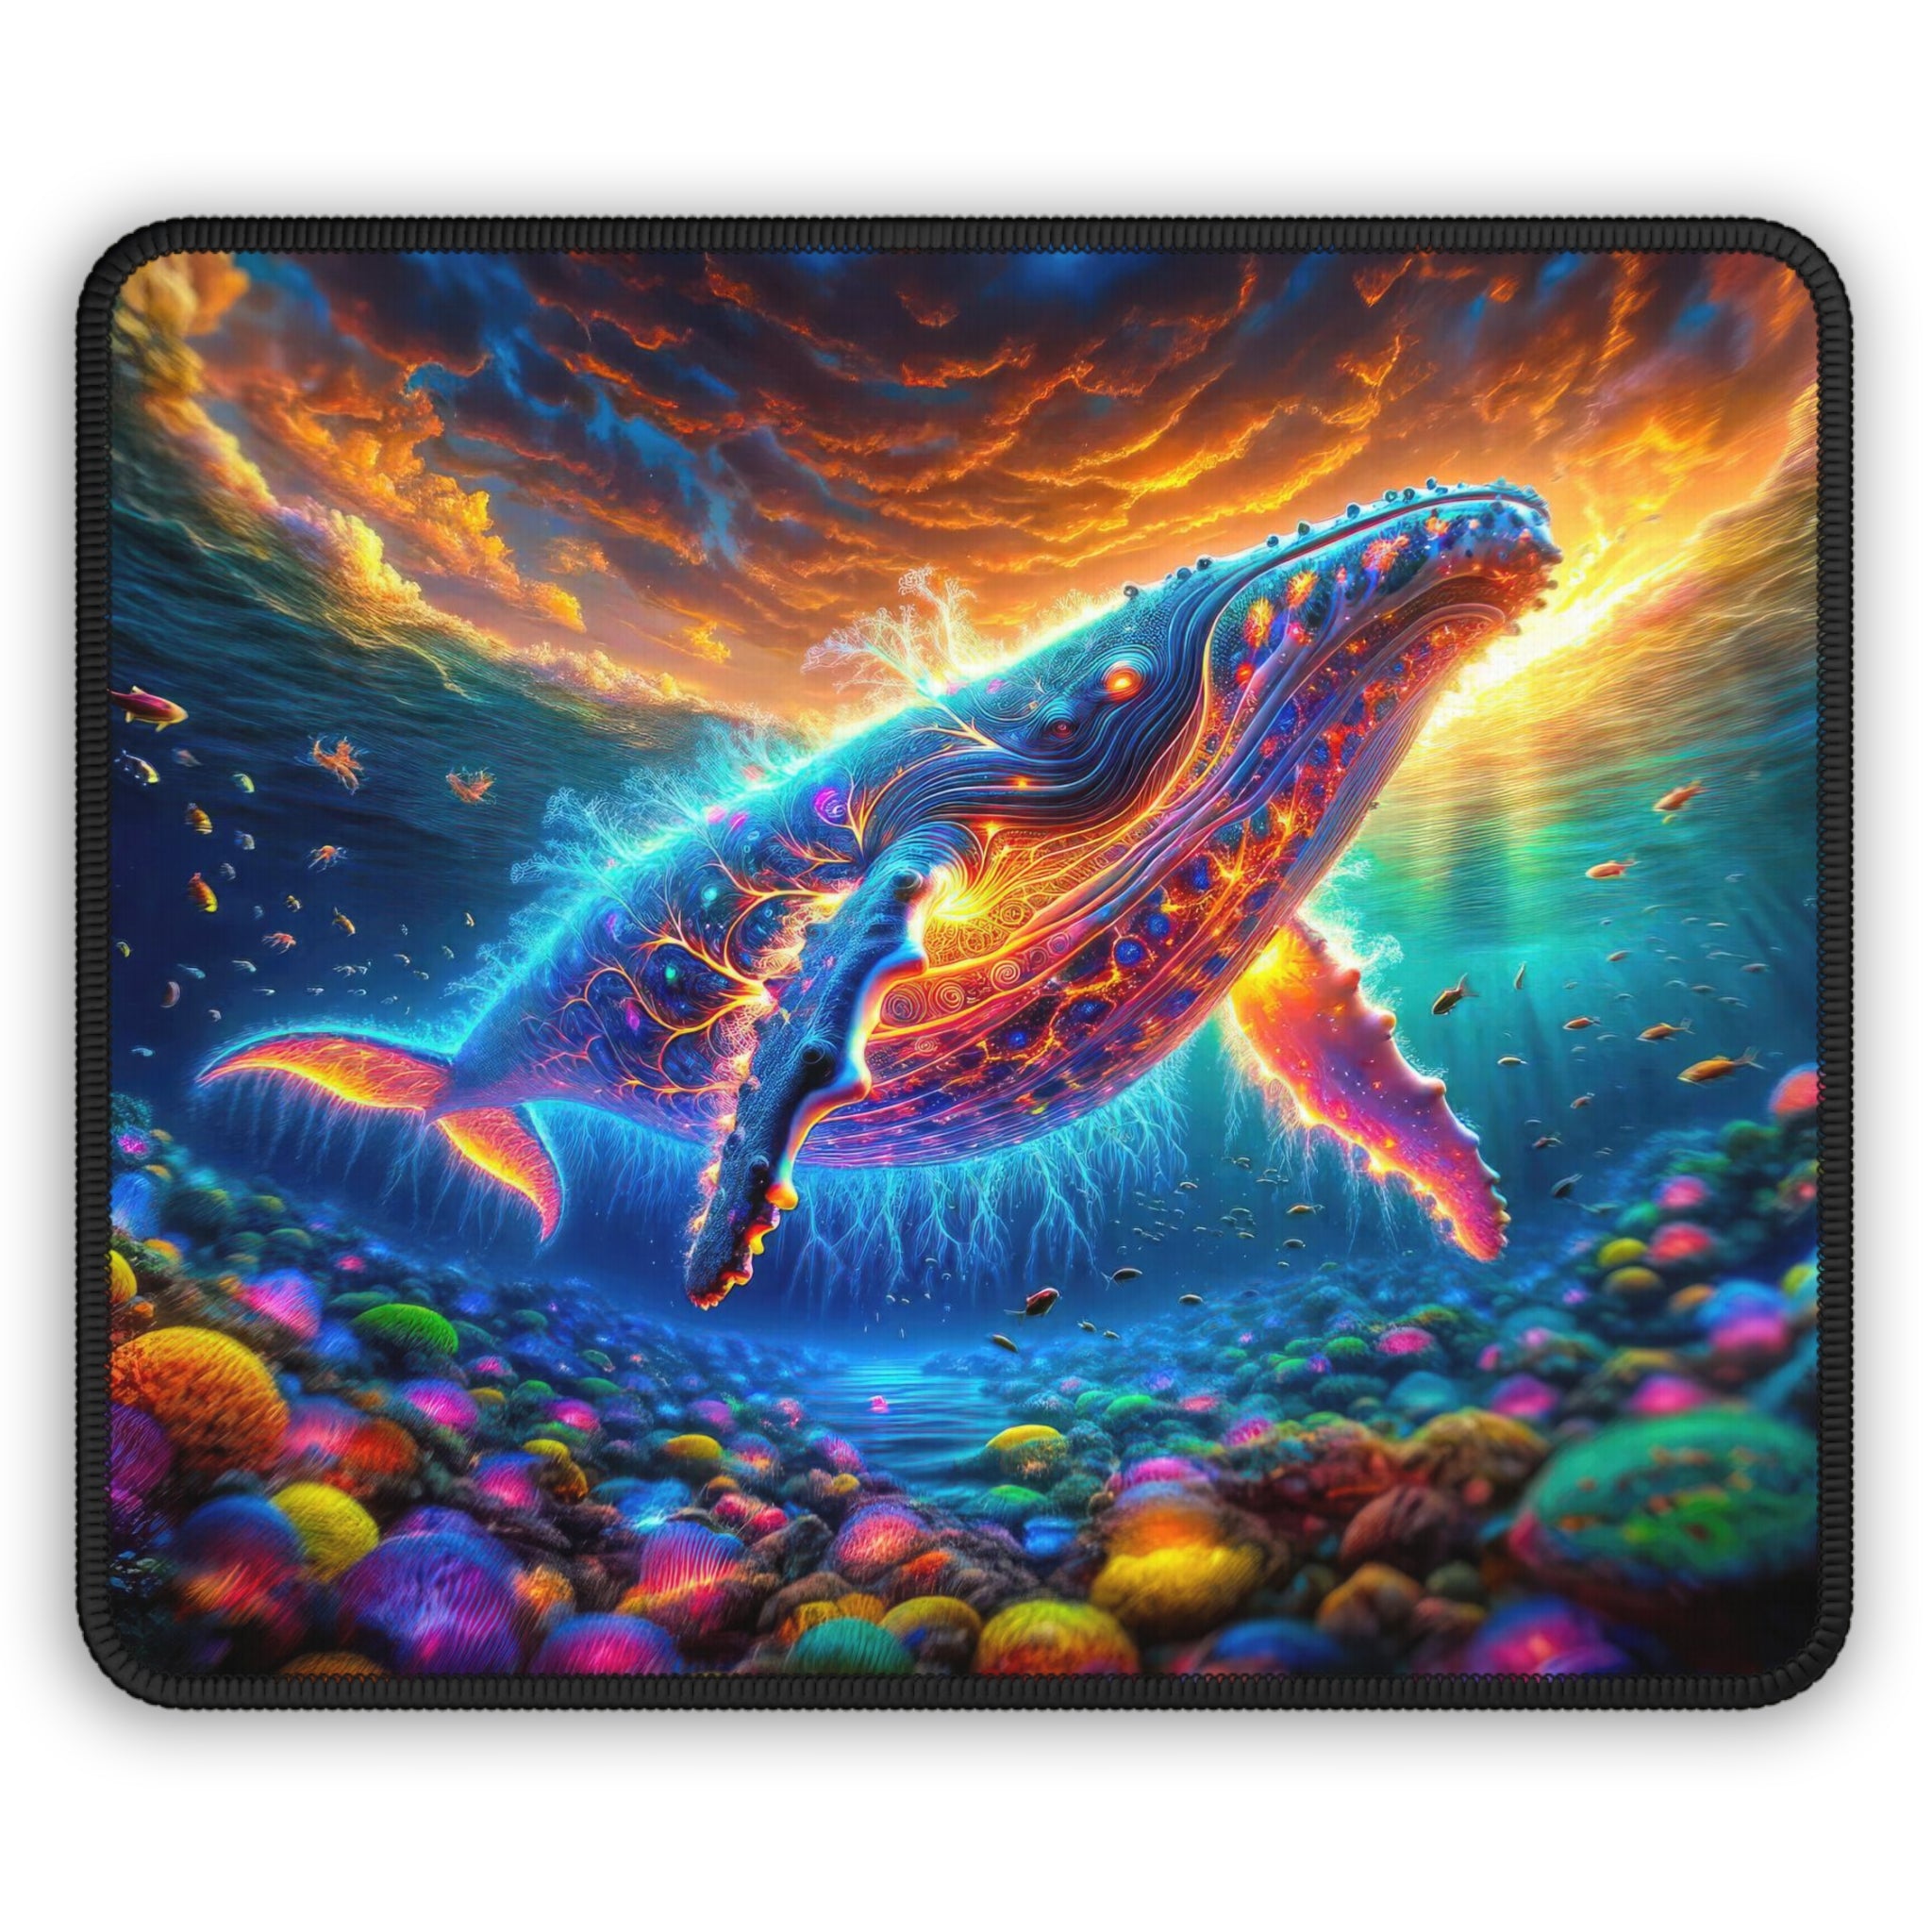 Cosmic Dance of the Humpback Whale Gaming Mouse Pad